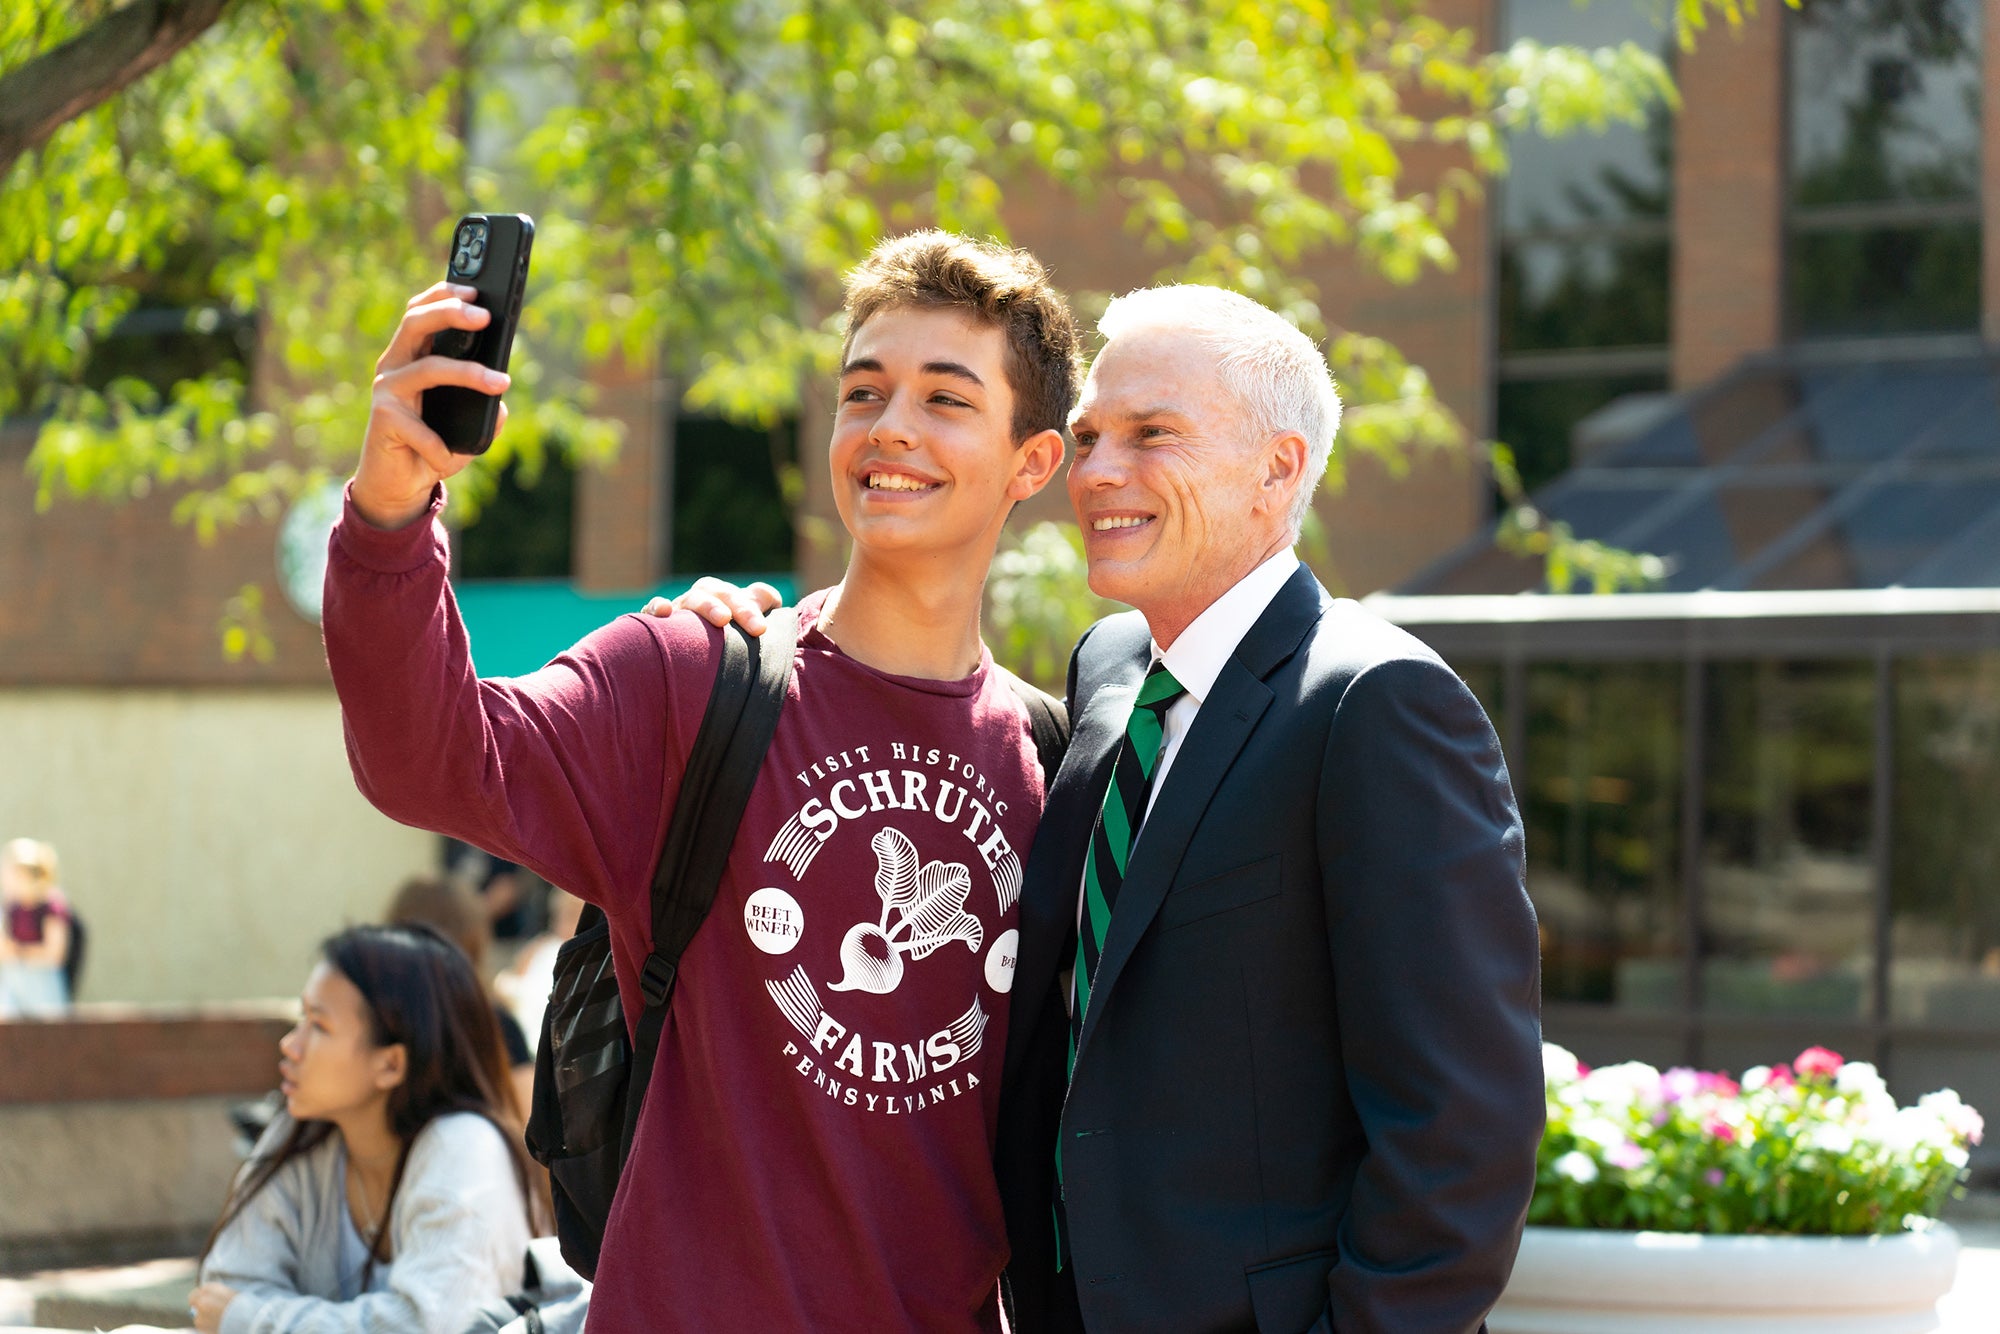 Brad D Smith takes a selfie with a student on the Memorial Student Center Plaza